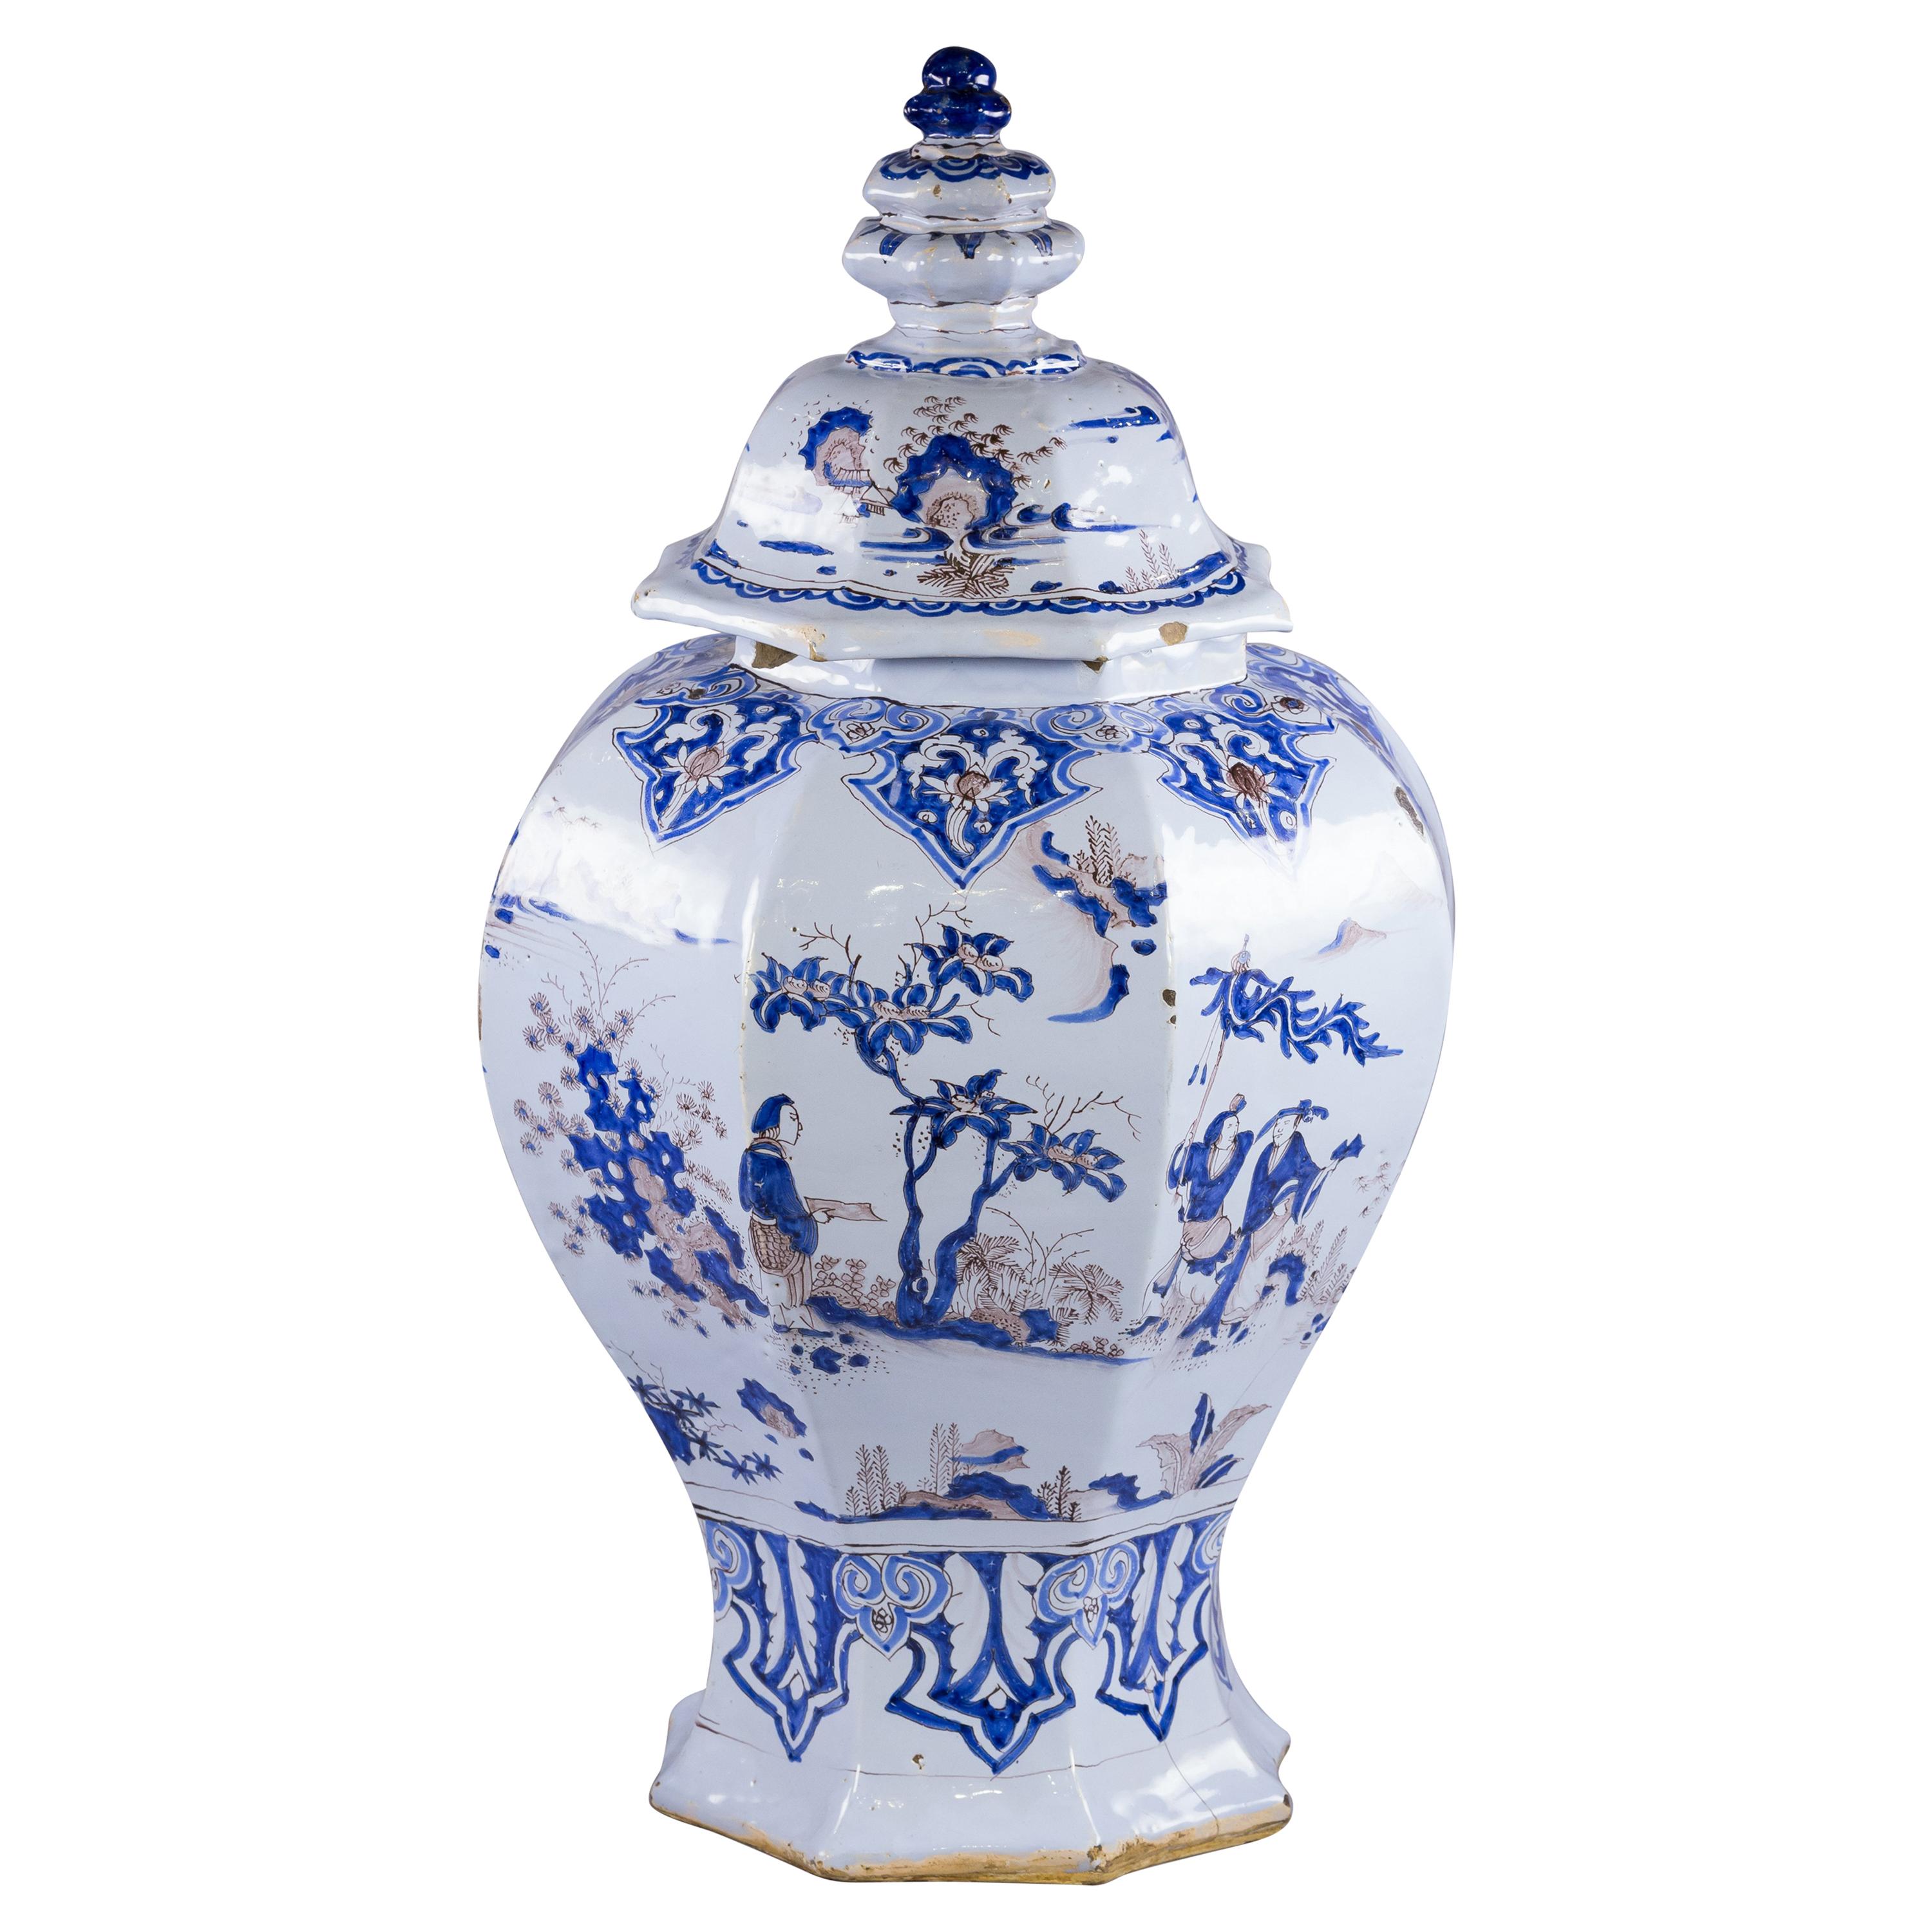 Large and Rare French Faience Chinoiserie Covered Temple Jar, Nevers, circa 1740